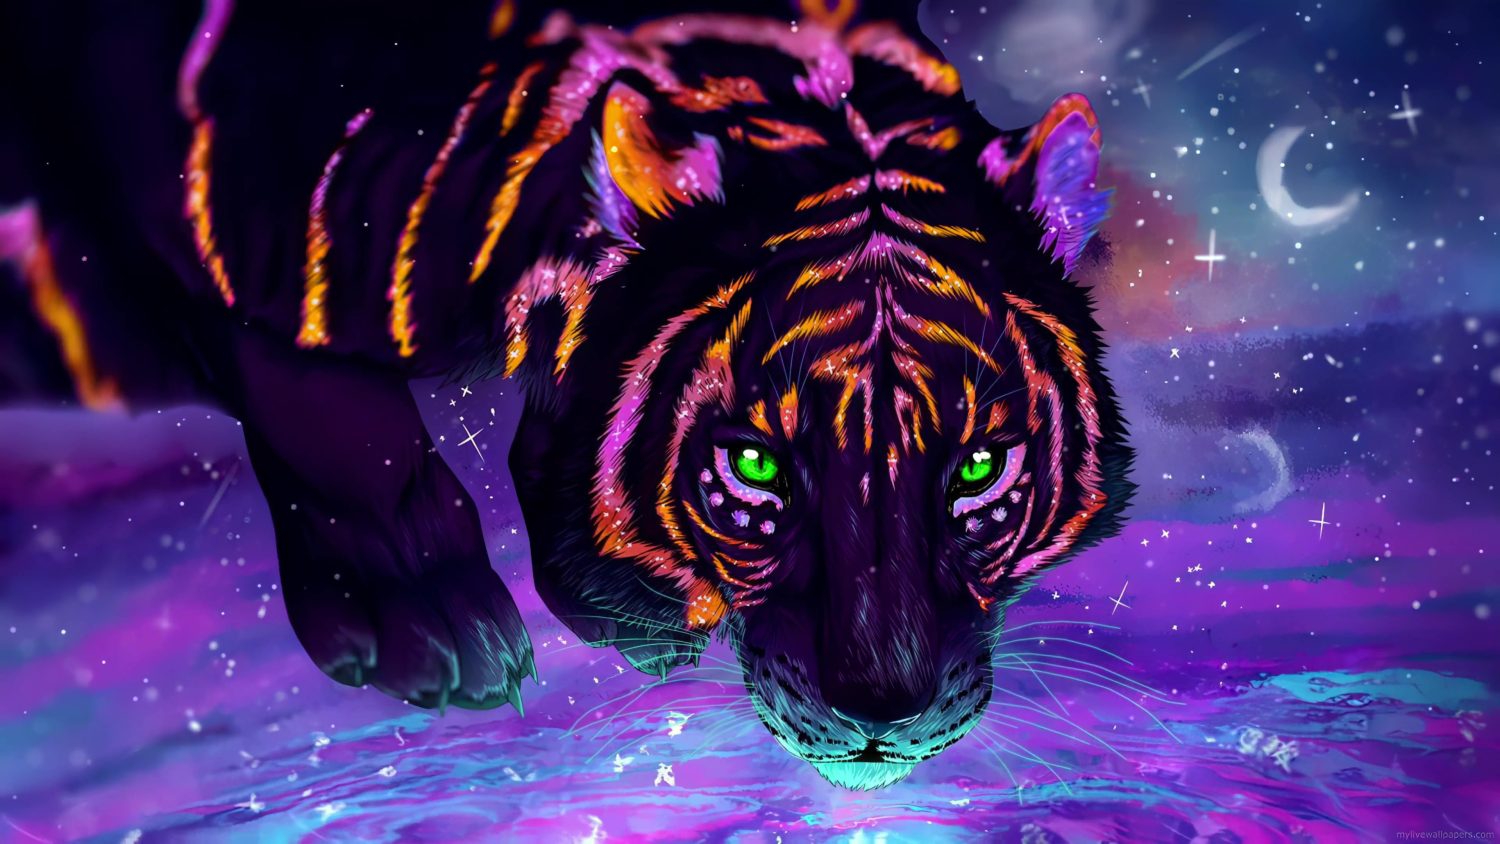 Neon Tiger Drinking Snow Live Wallpaper - HDLiveWall.com